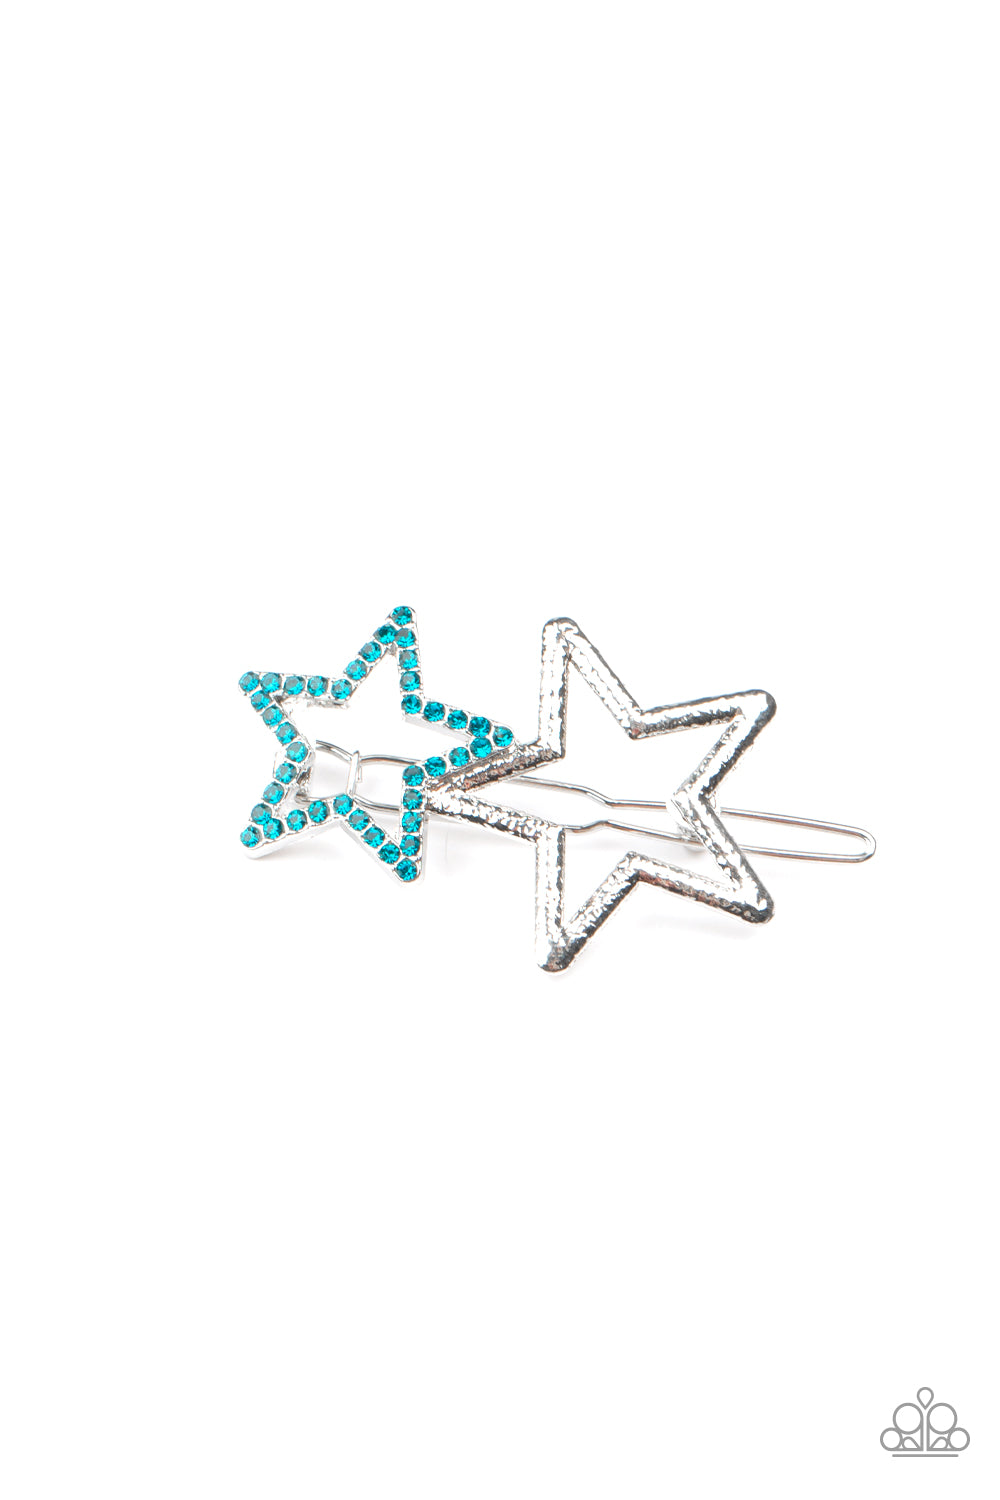 Lets Get This Party STAR-ted - blue - Paparazzi hair clip